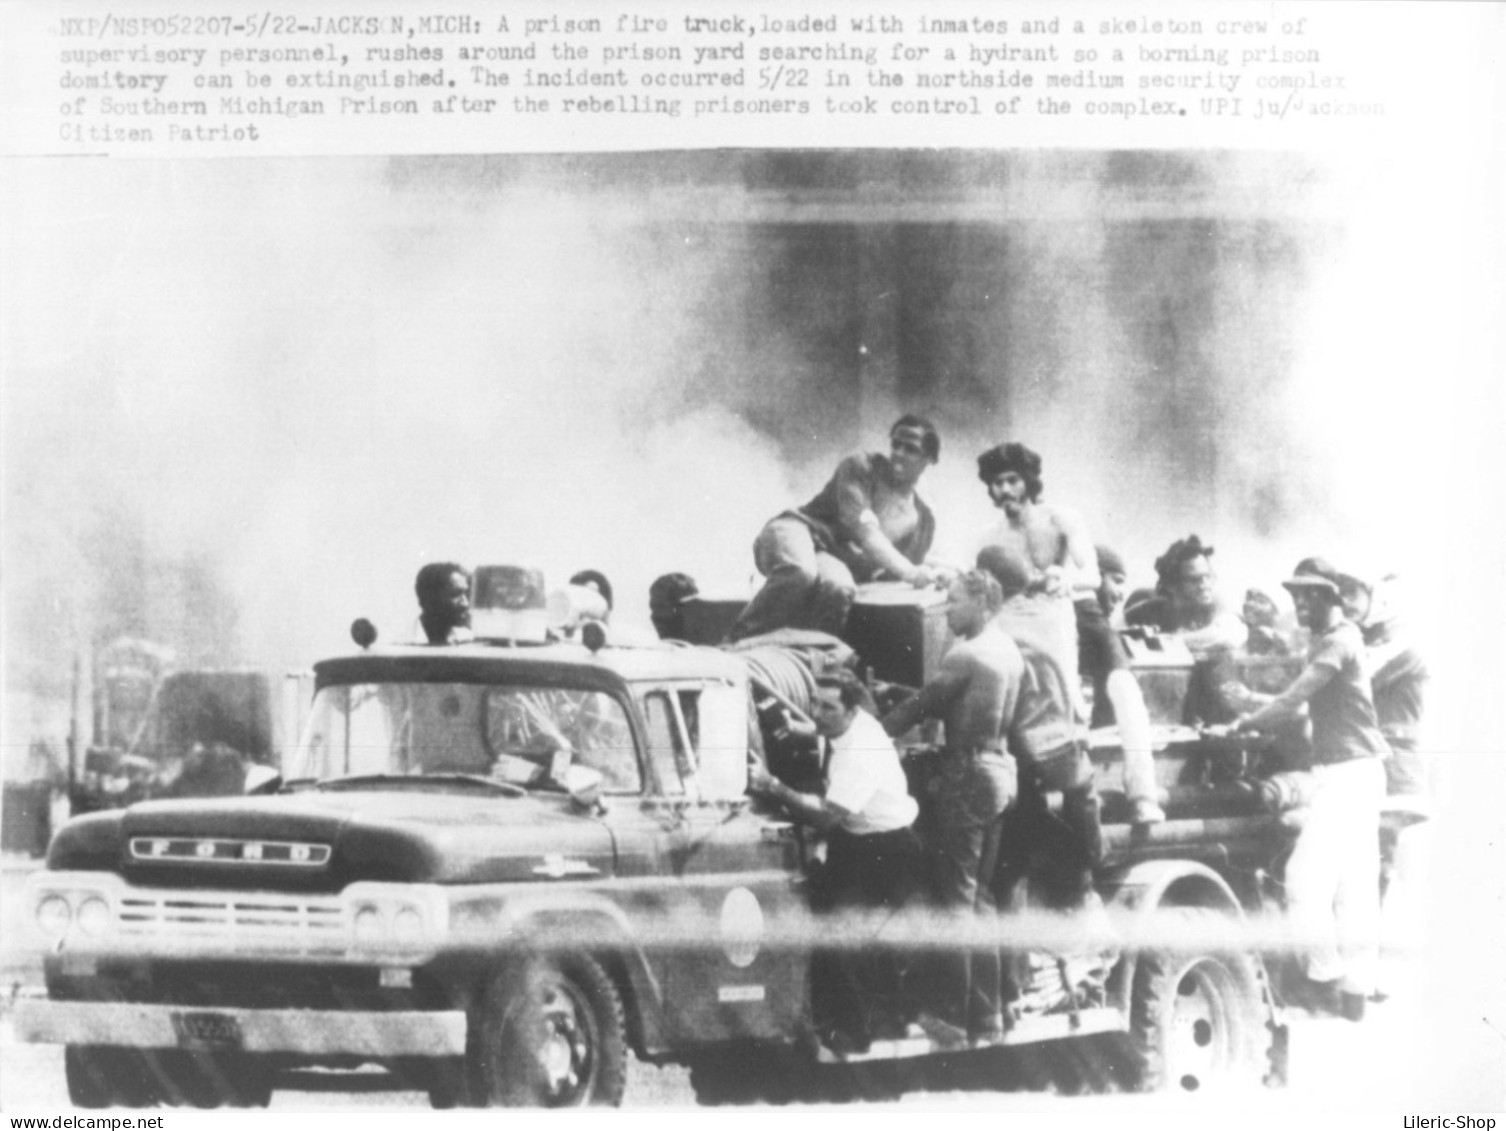 PHOTO AFP - INMATES AT MICHIGAN PRISON RIOT AND START SEVERAL FIRES May 22, 1981 - FIRE TRUCK FORD F600 SIZE 180X240 Mm - America